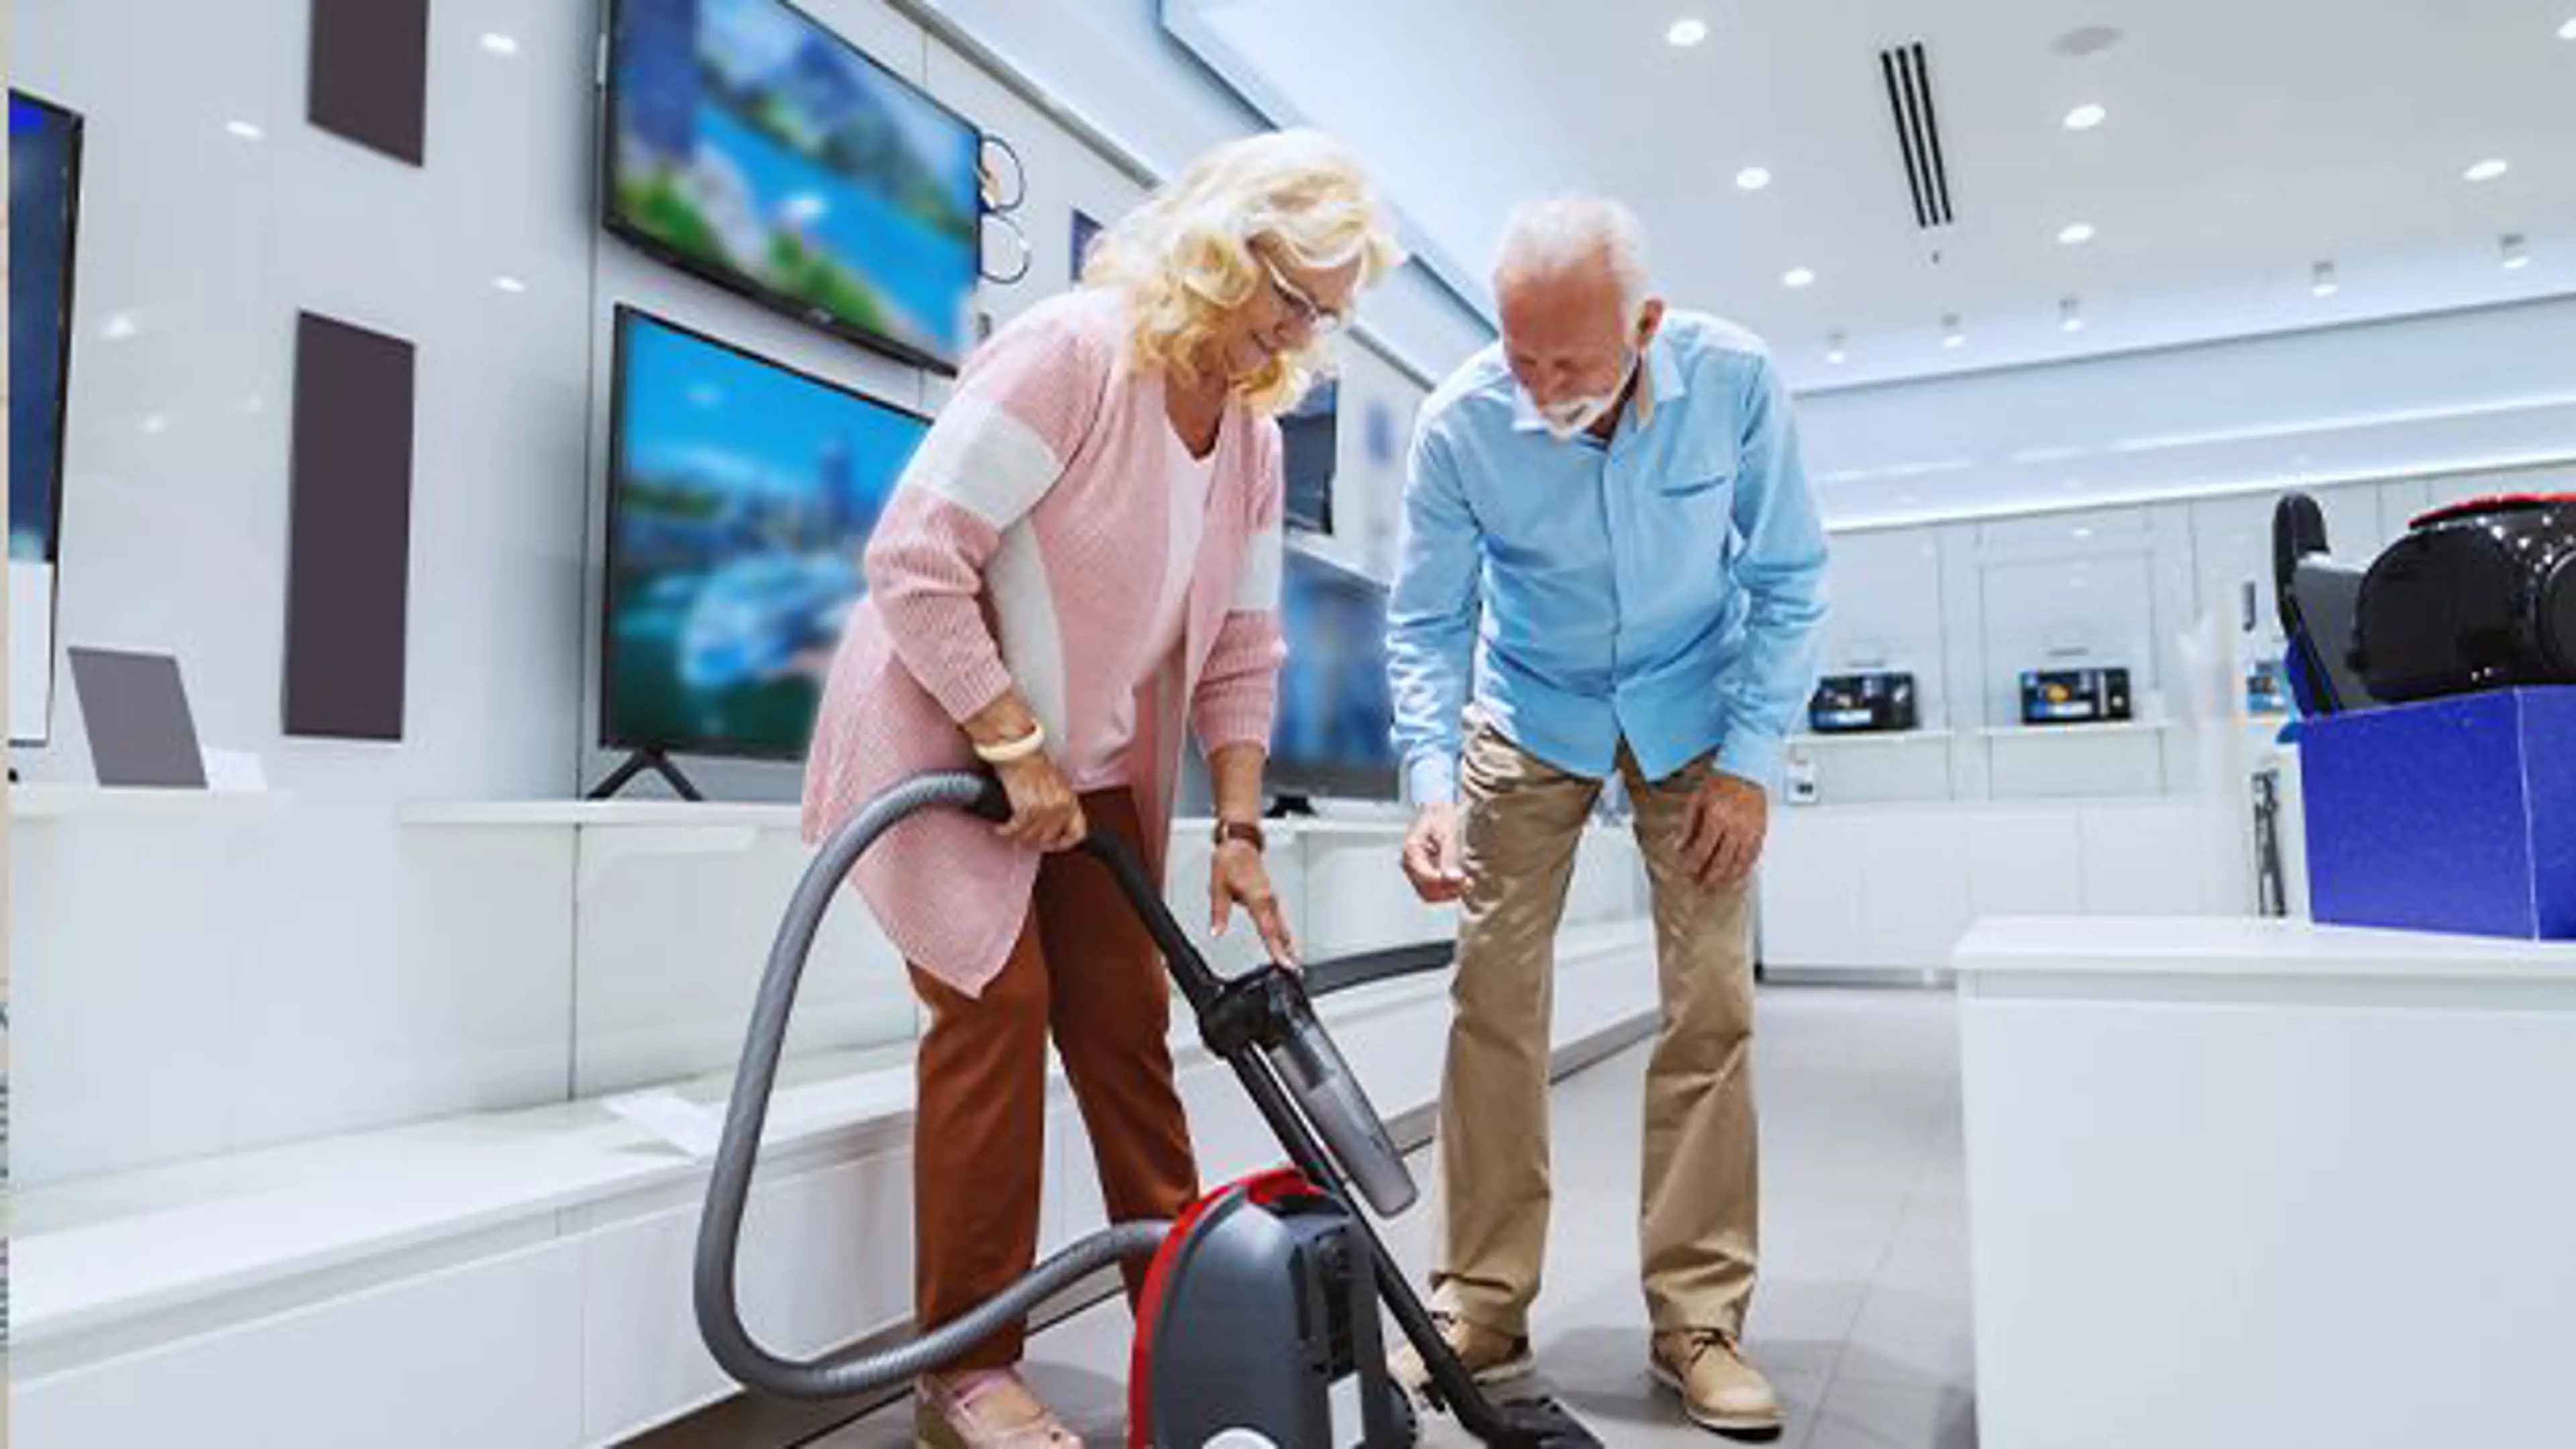 A woman and a man testing a vacuum cleaner in a store